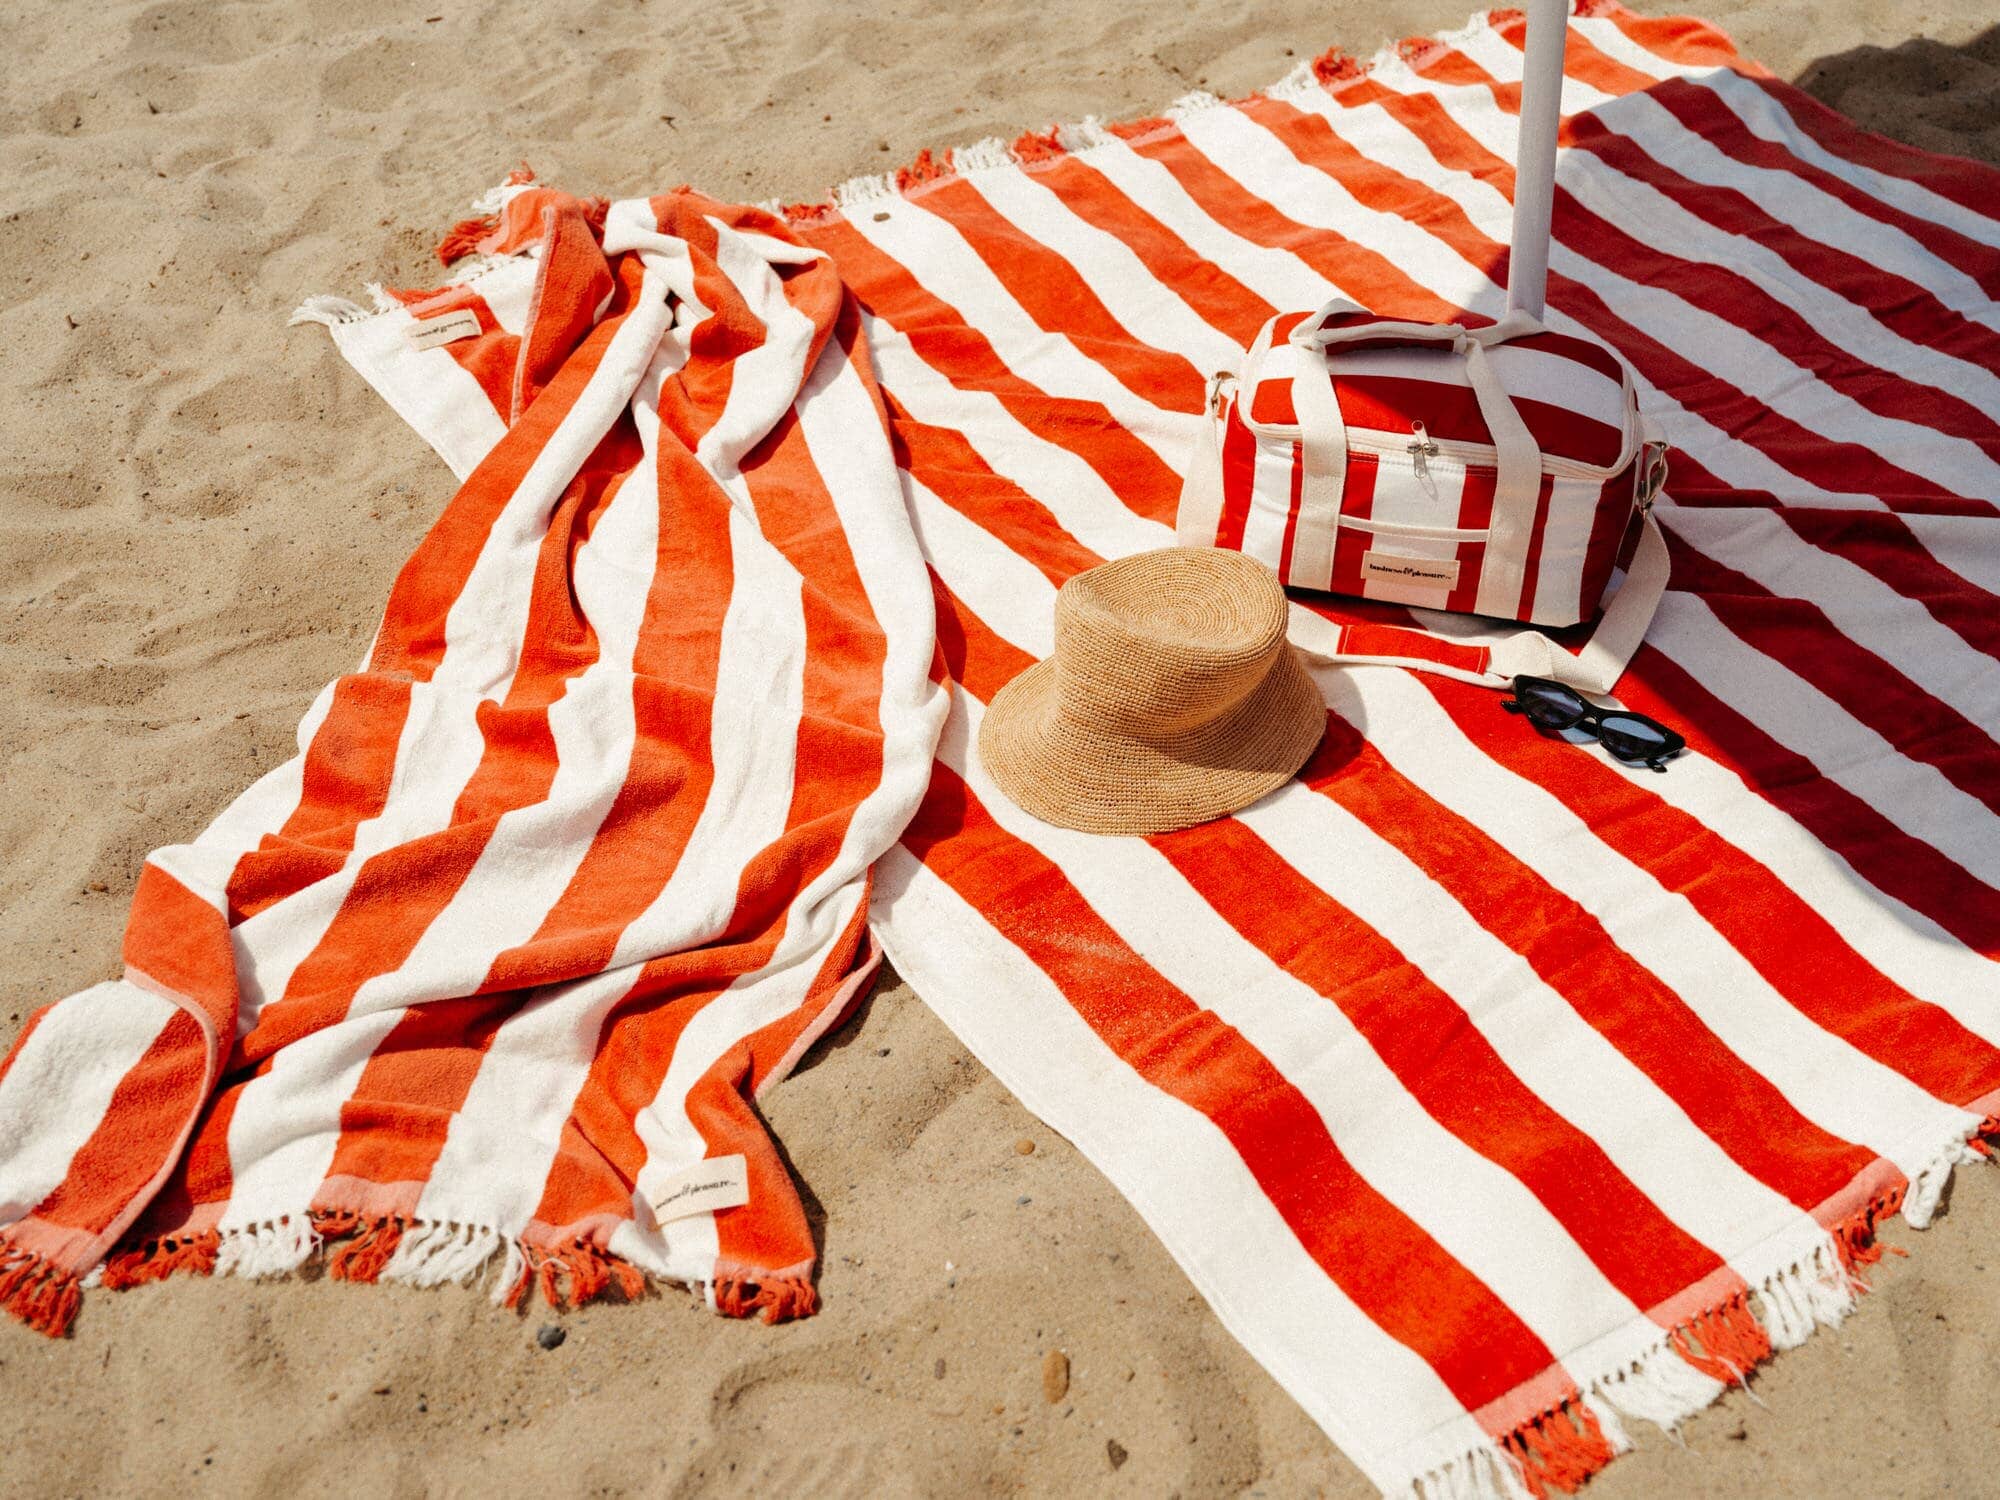 Le sirenuse holiday blanket, towel and cooler on the sand